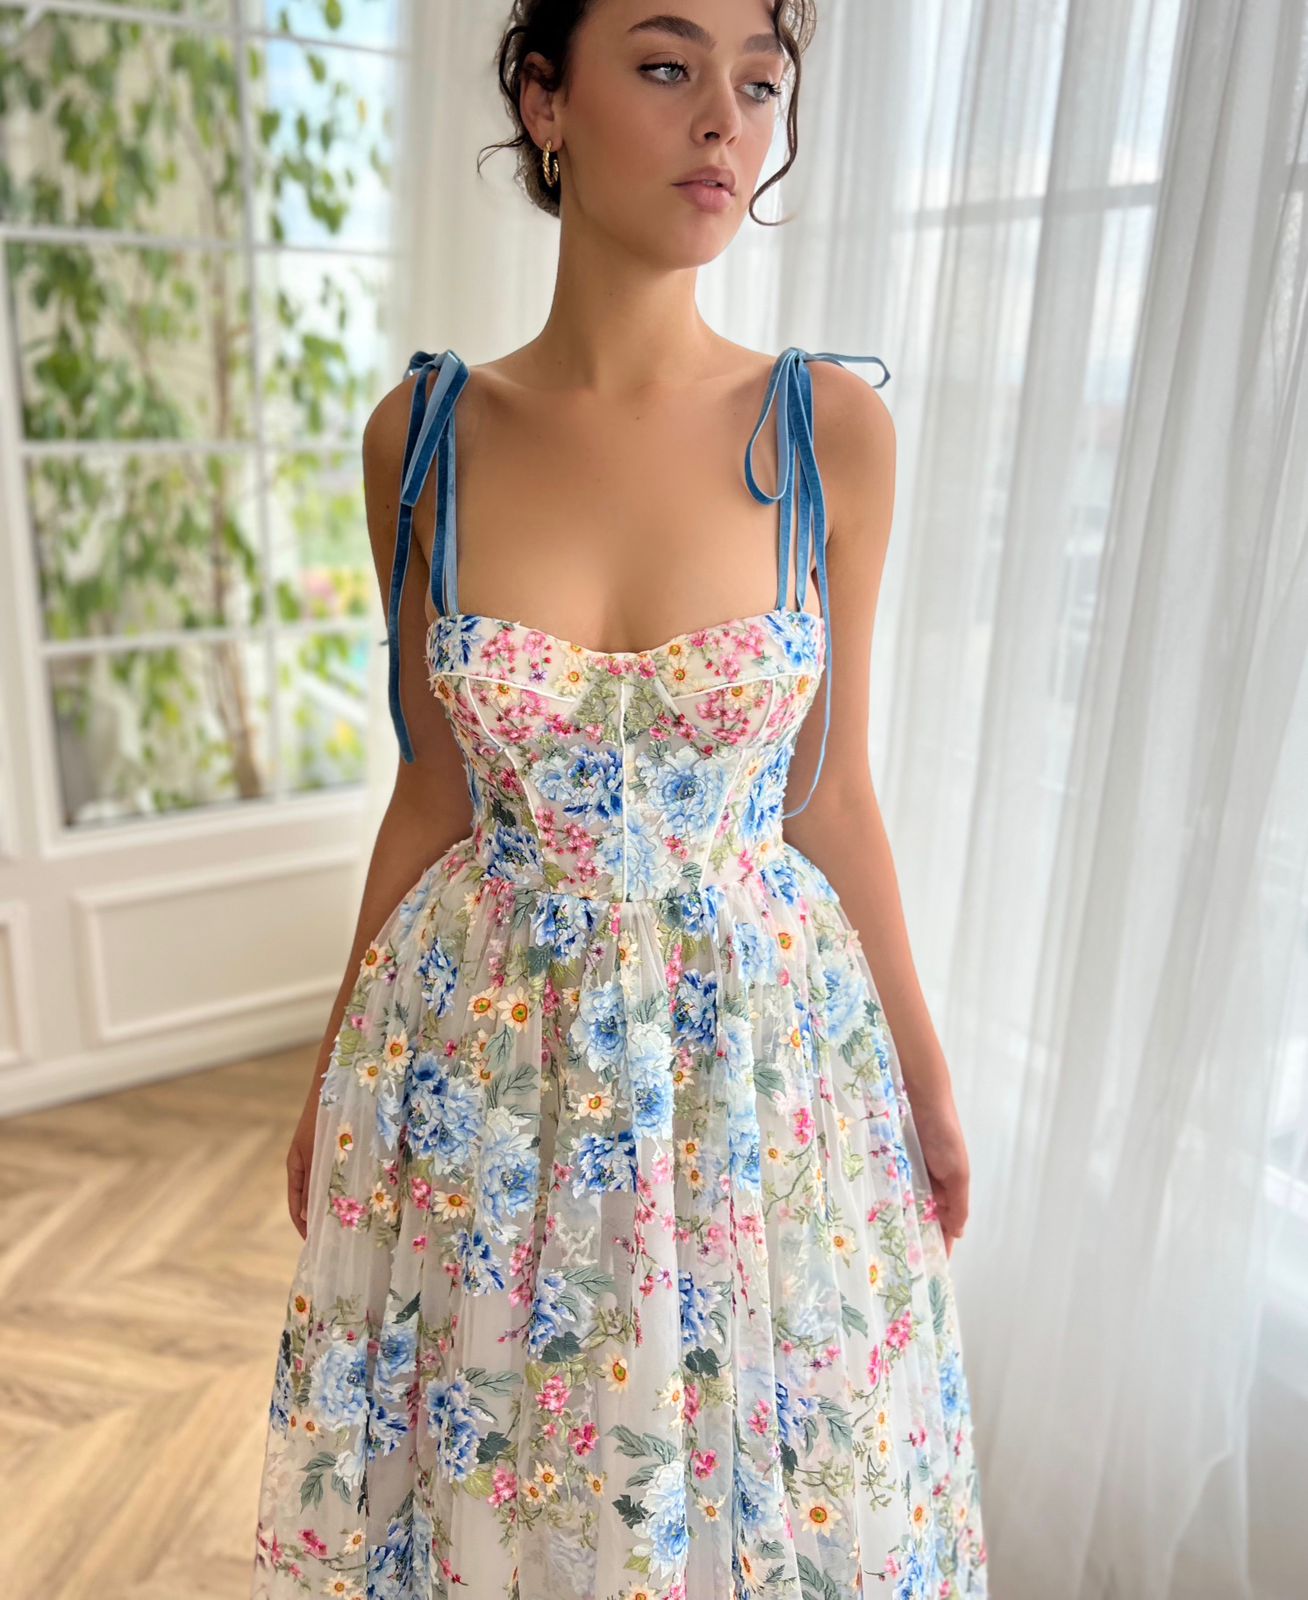 Colorful midi dress with spaghetti straps, floral and embroidery